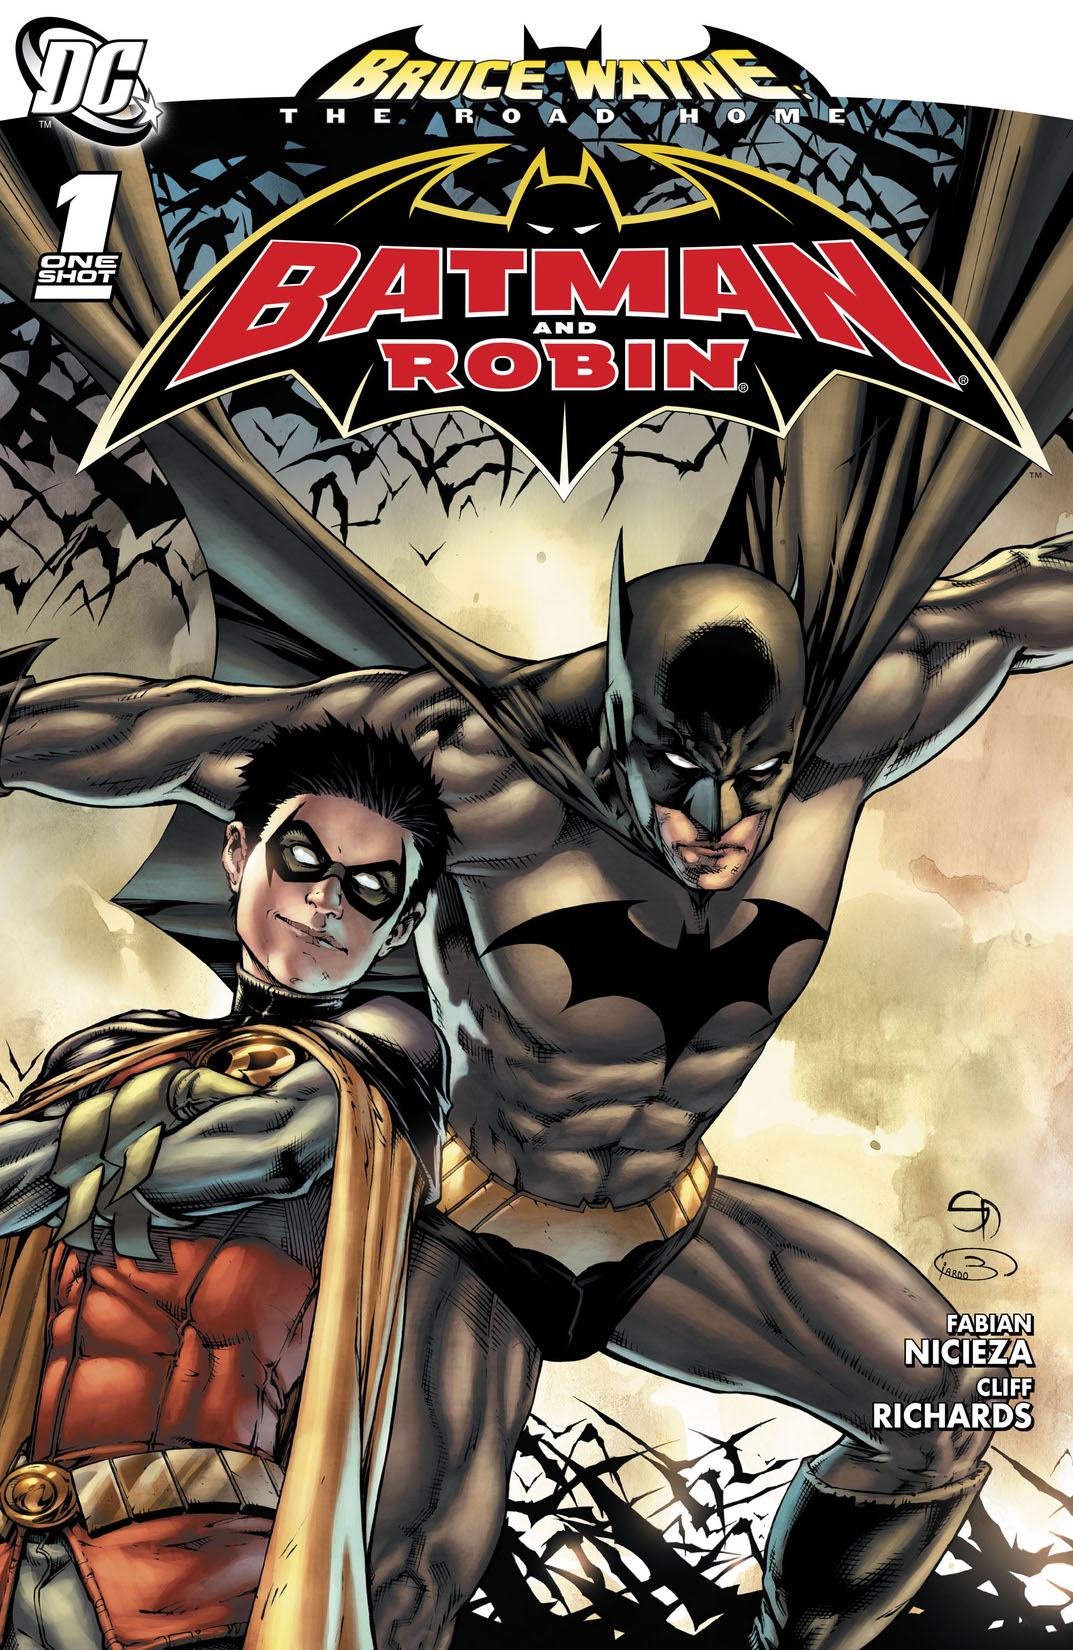 Bruce Wayne: The Road Home: Batman & Robin #1 preview images